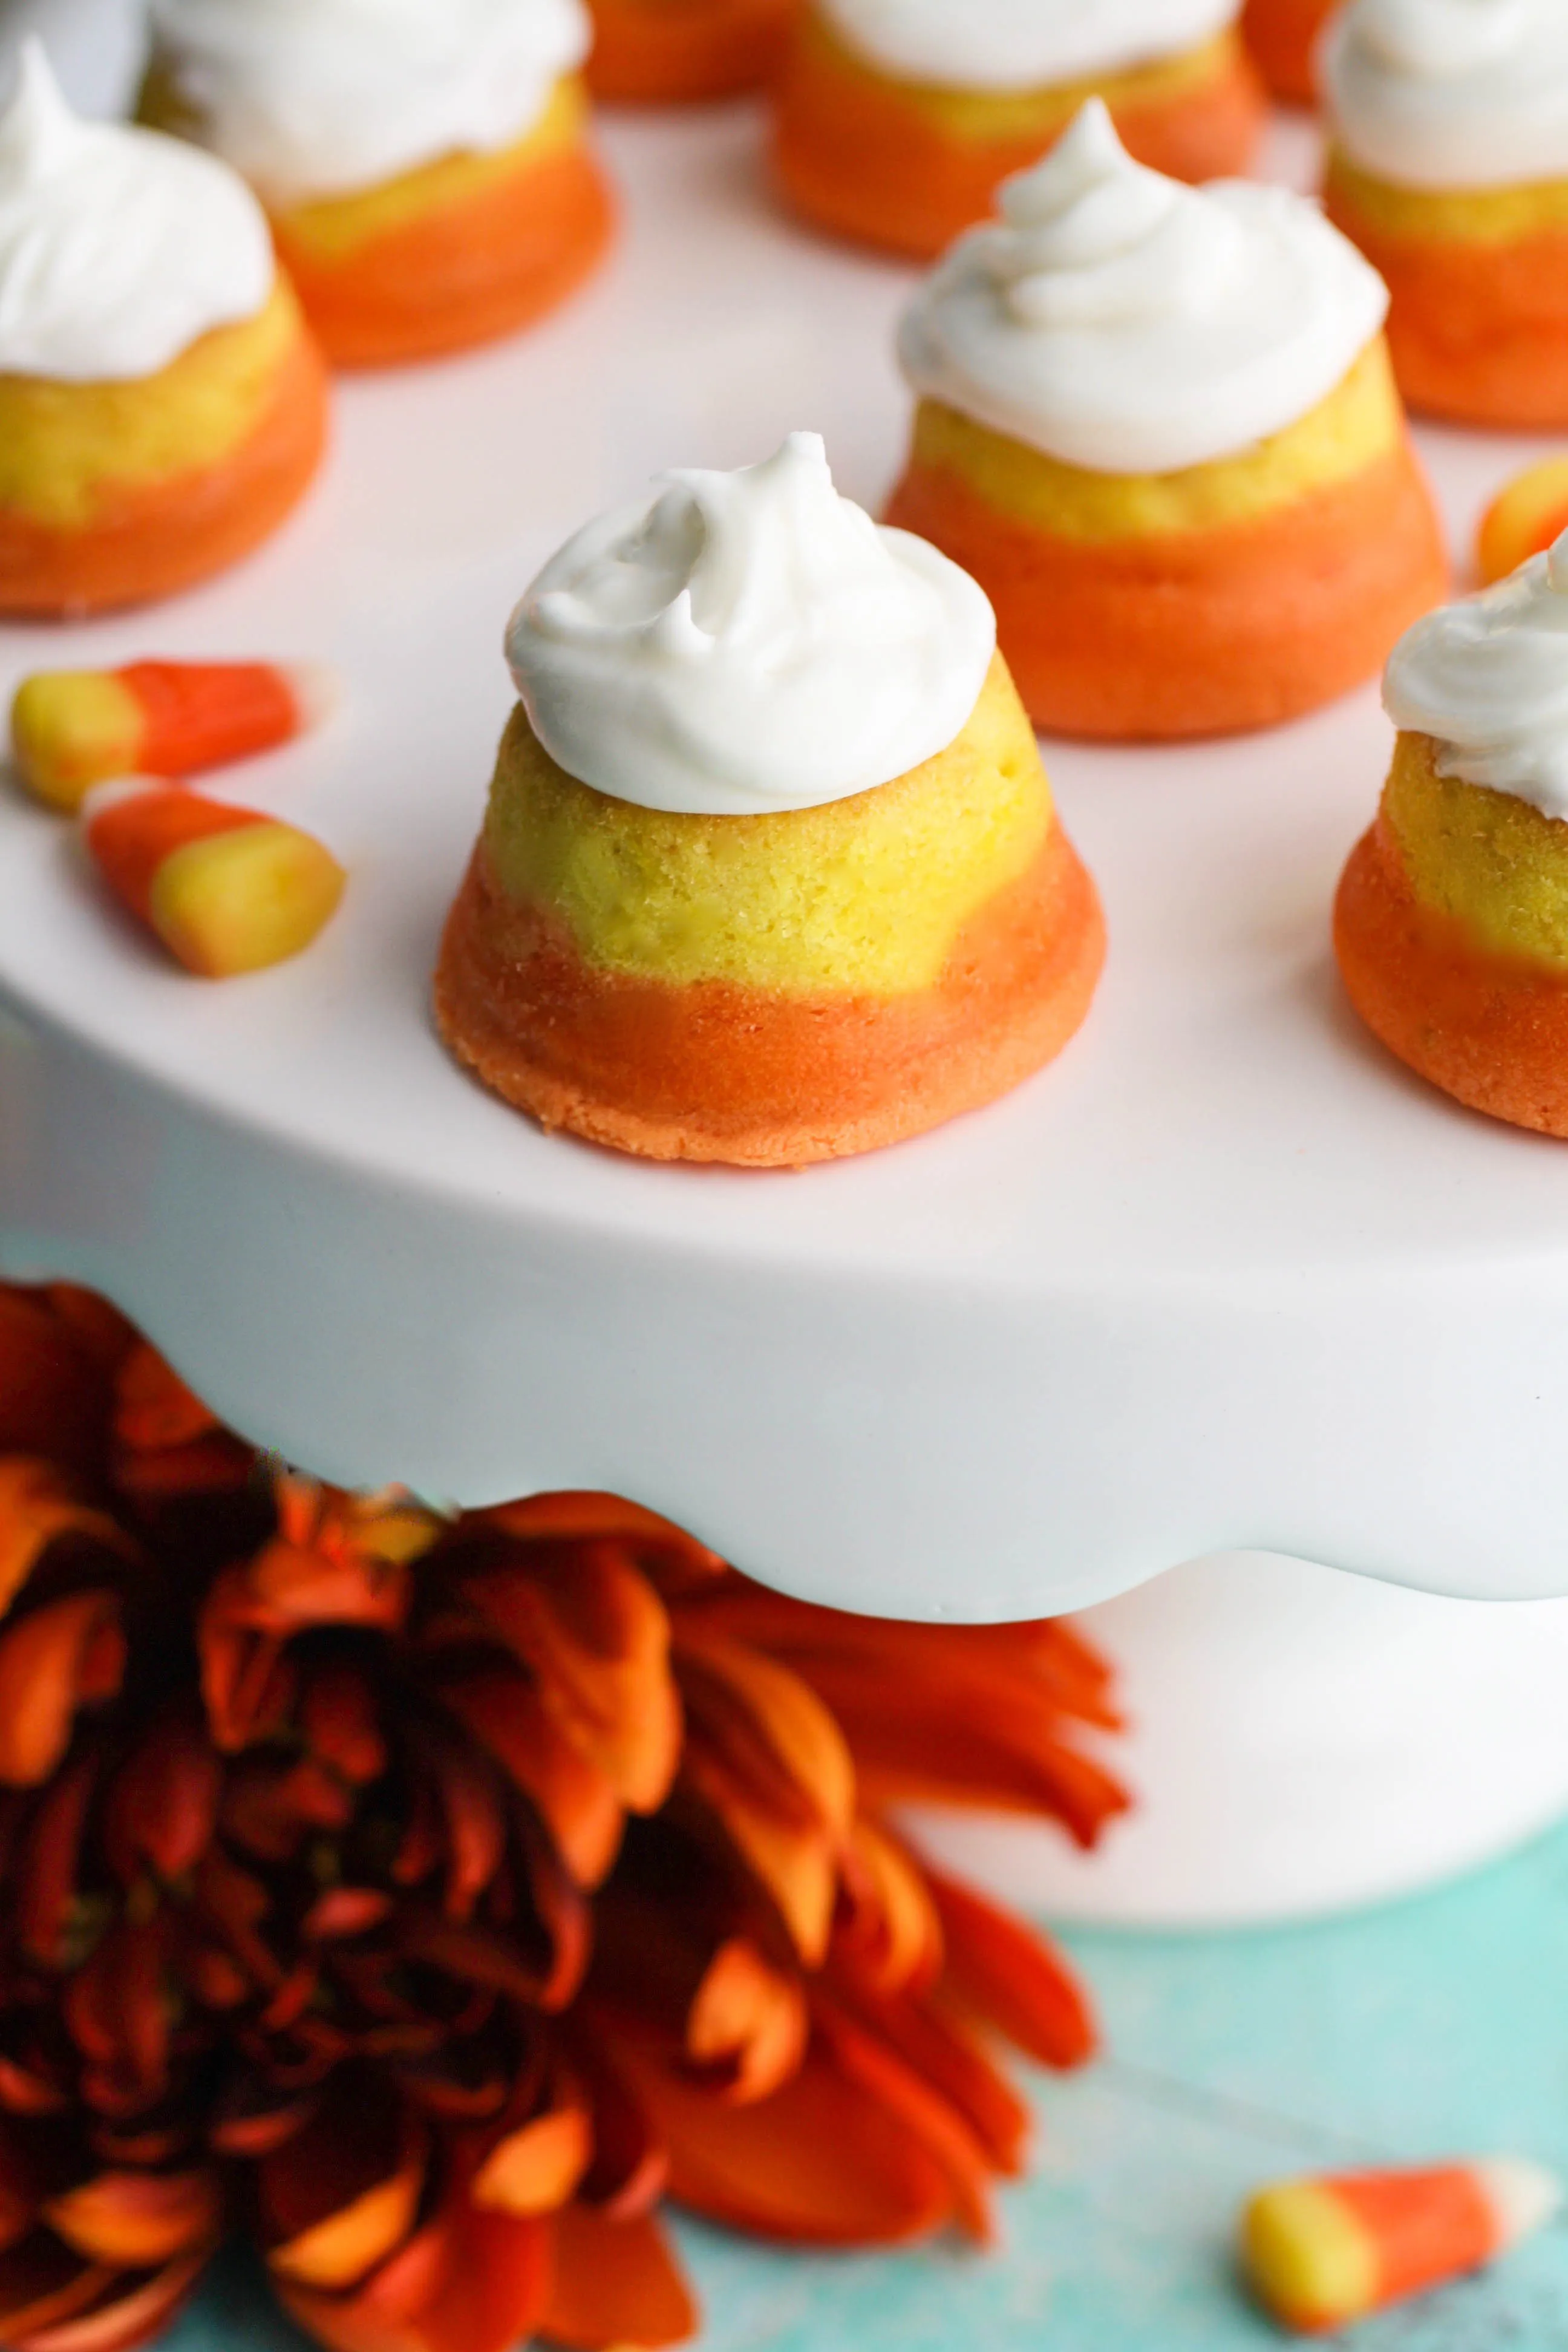 Mini “Candy Corn” Cupcakes with Buttercream Frosting make a great Halloween dessert! You'll love serving these mini cupcakes as a Halloween treat!